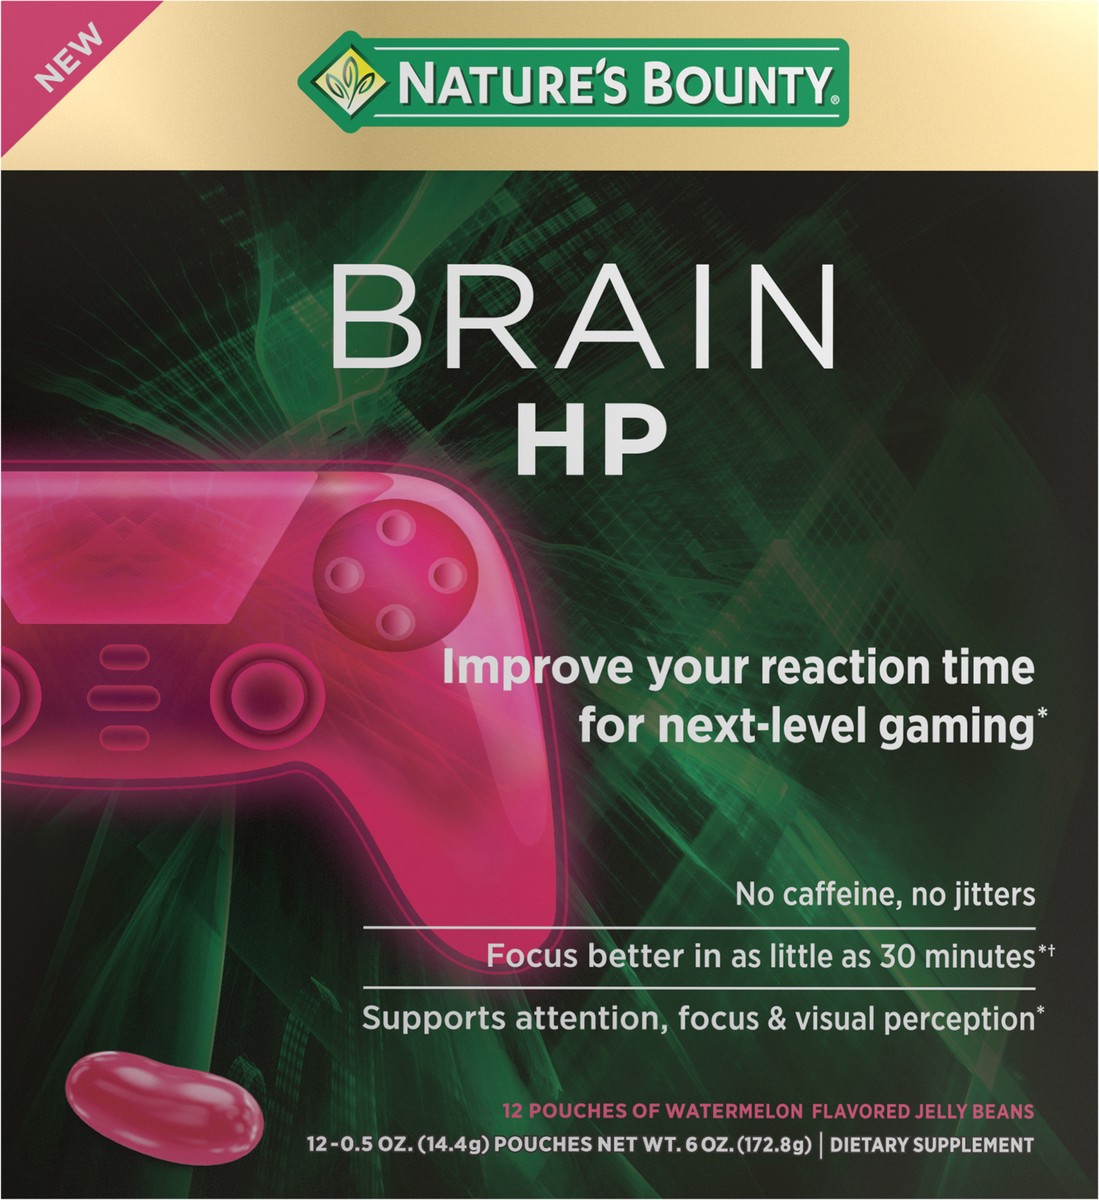 slide 11 of 11, Nature's Bounty Brain HP Watermelon Flavored Jelly Beans 12 ea, 12 ct